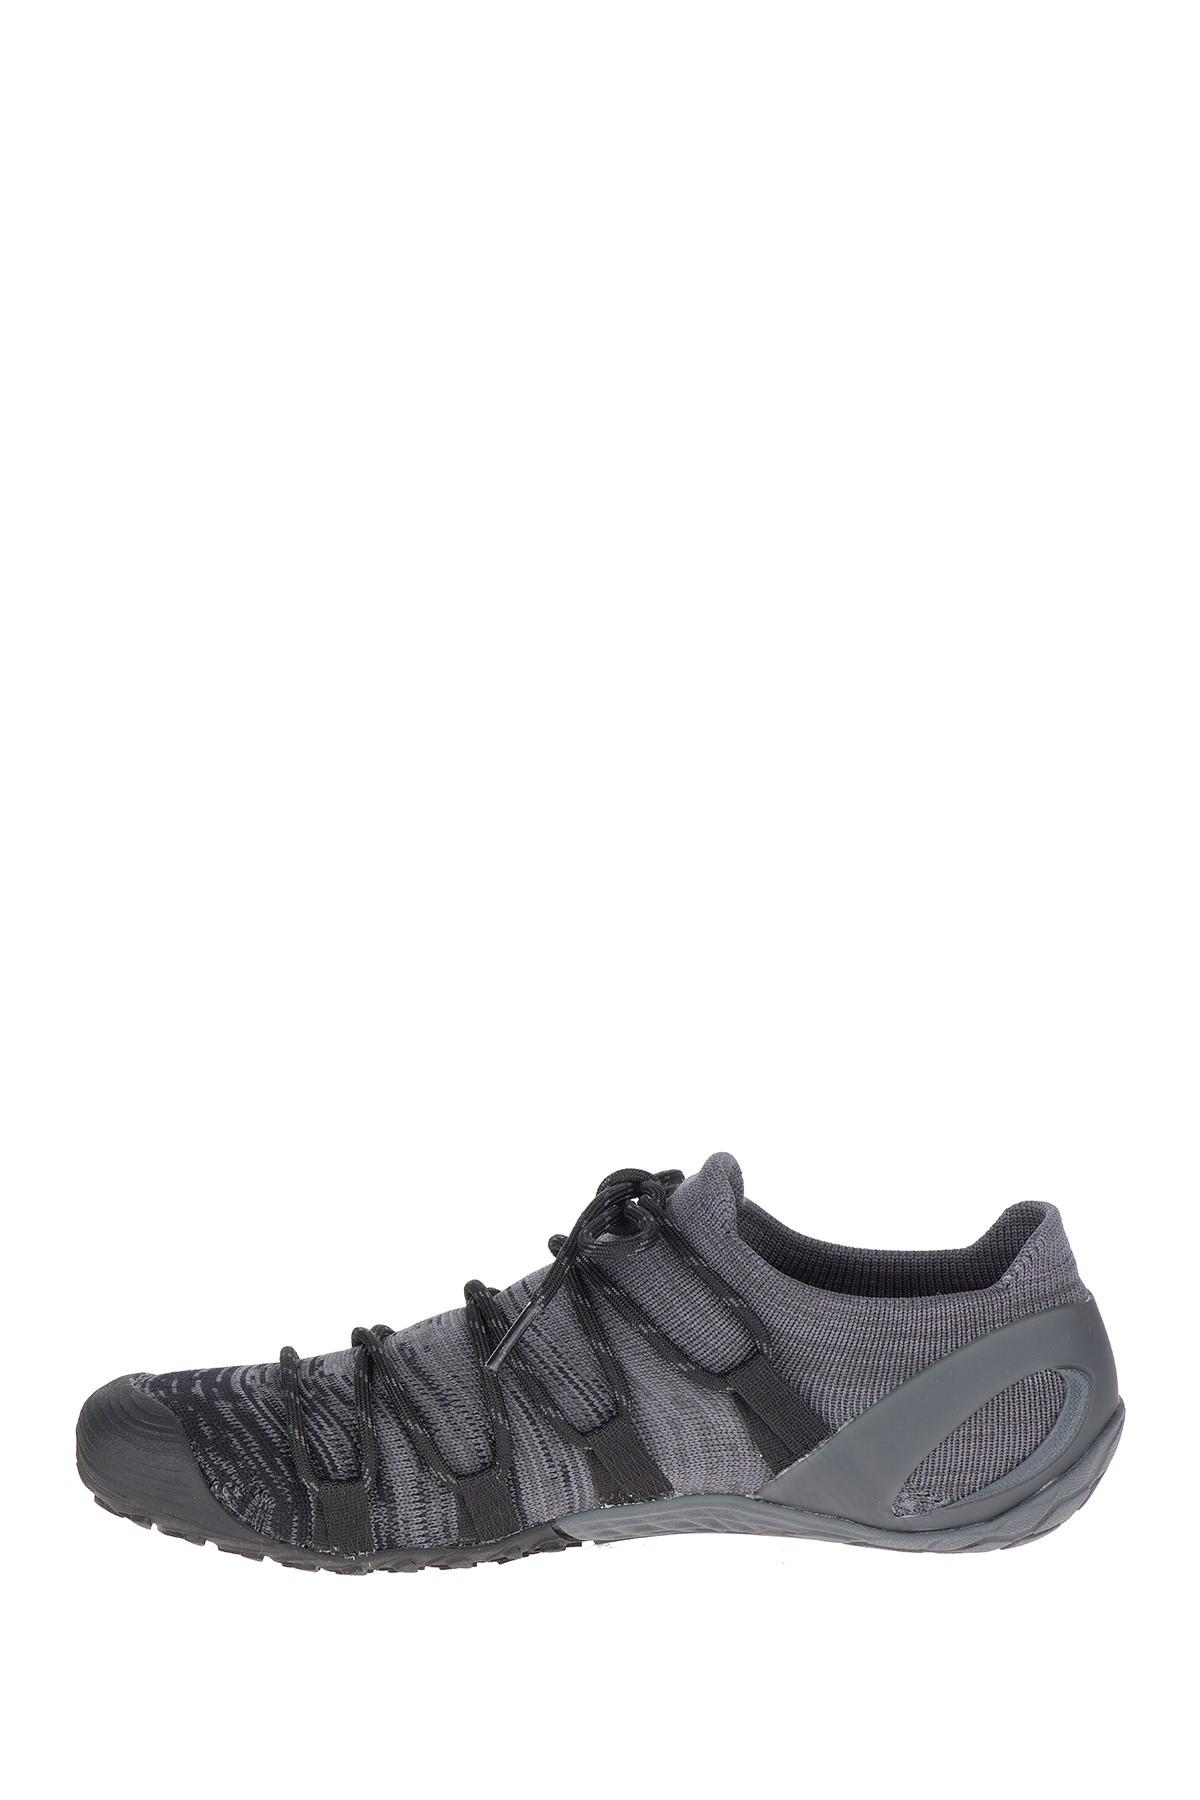 Merrell Glove 4 3d Fitness Shoes in | Lyst